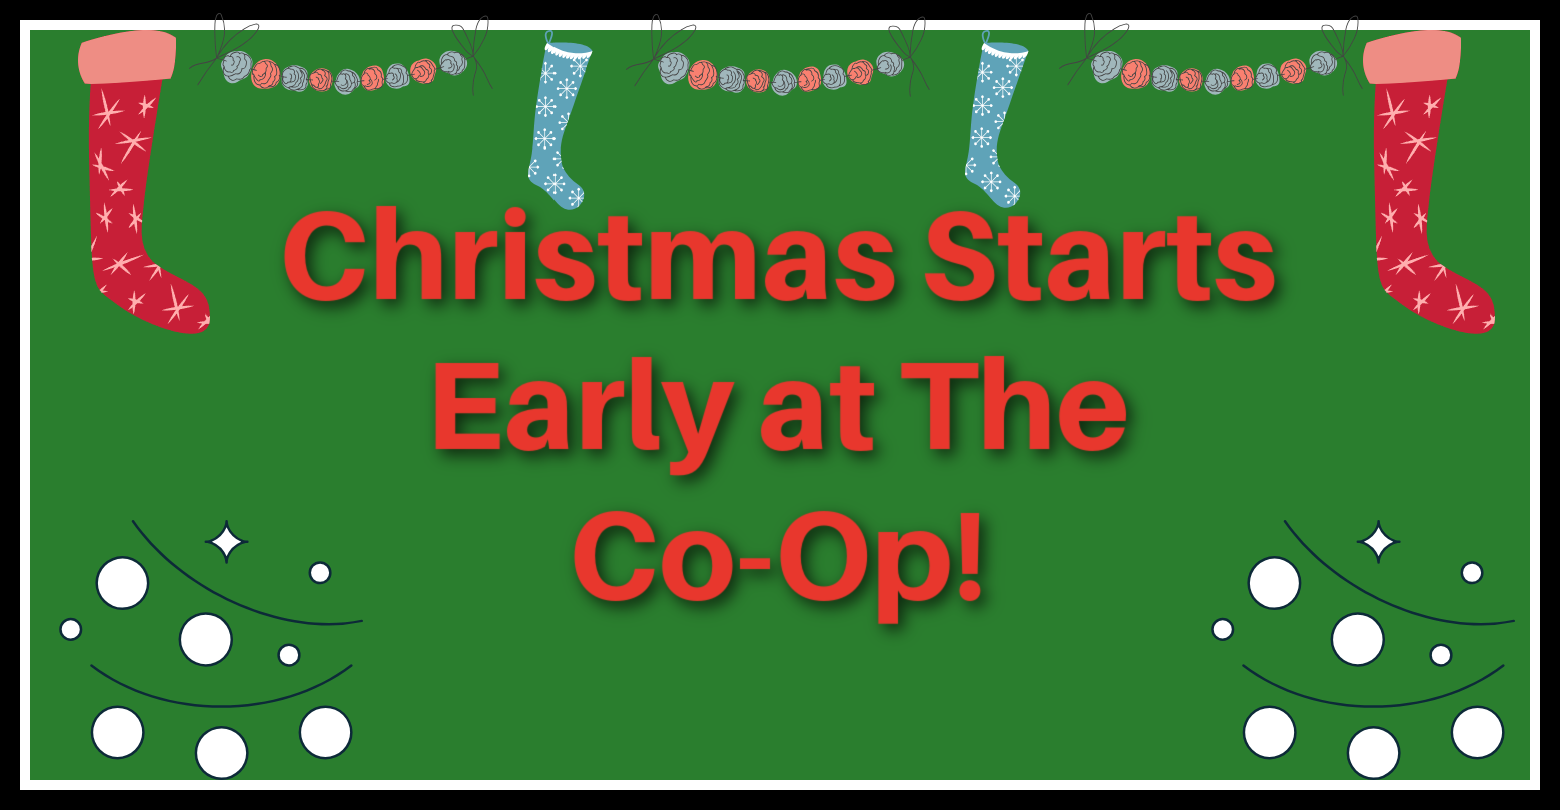 It's almost Christmas Time at The Co-Op!